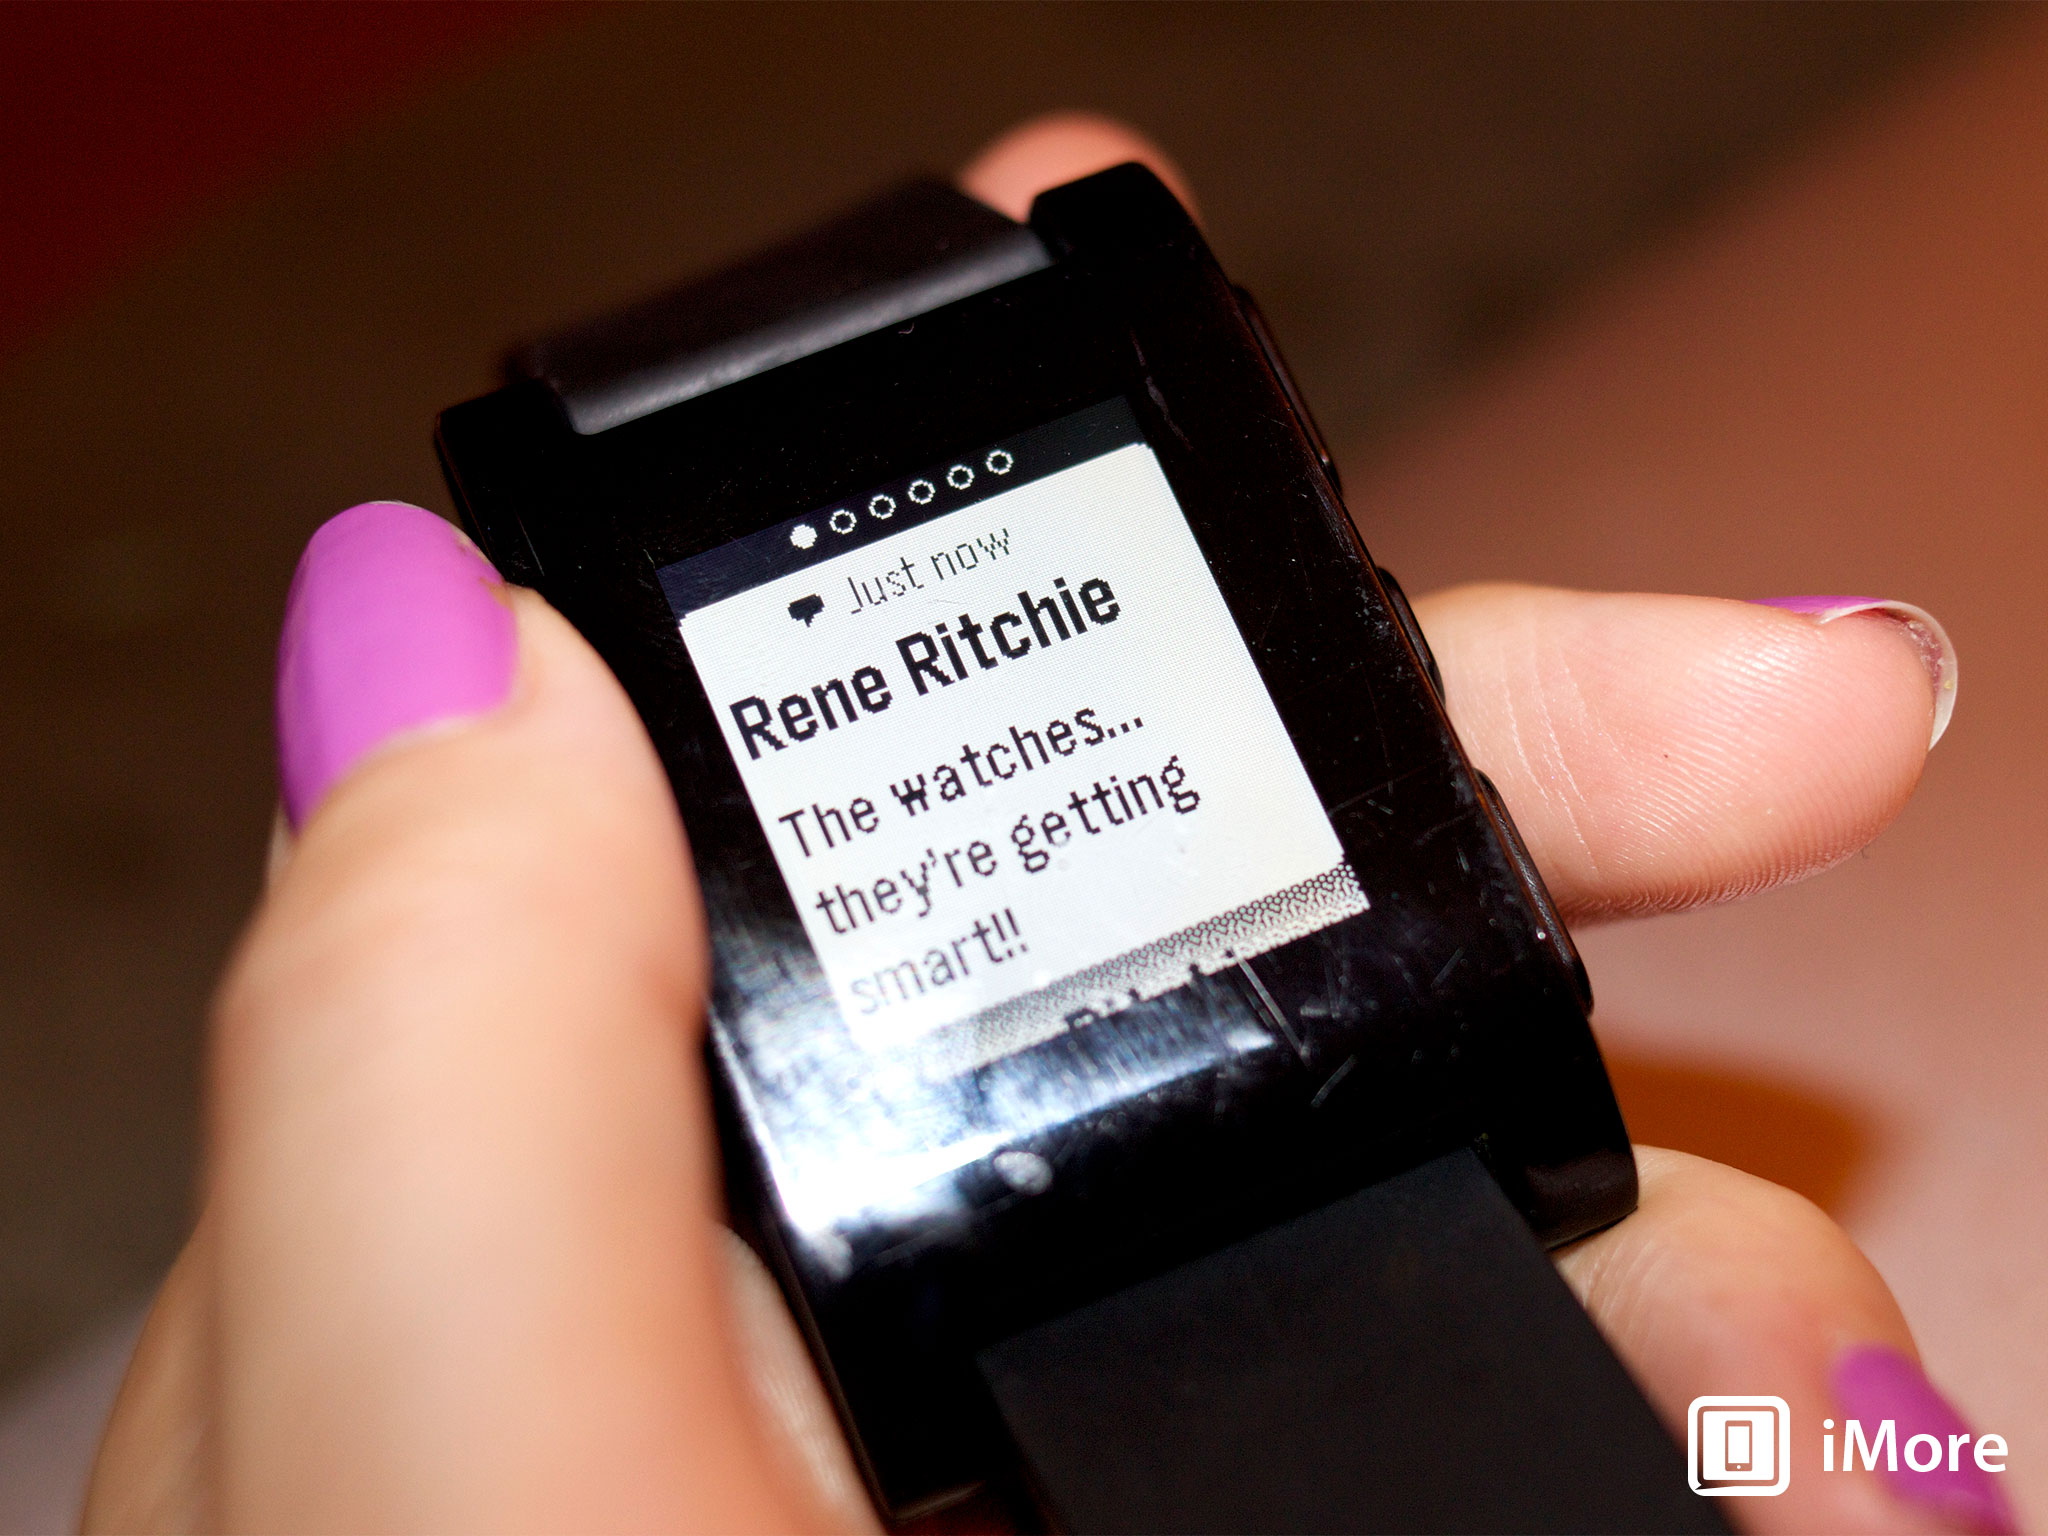 Pebble smartwatch now available from Best Buy Canada